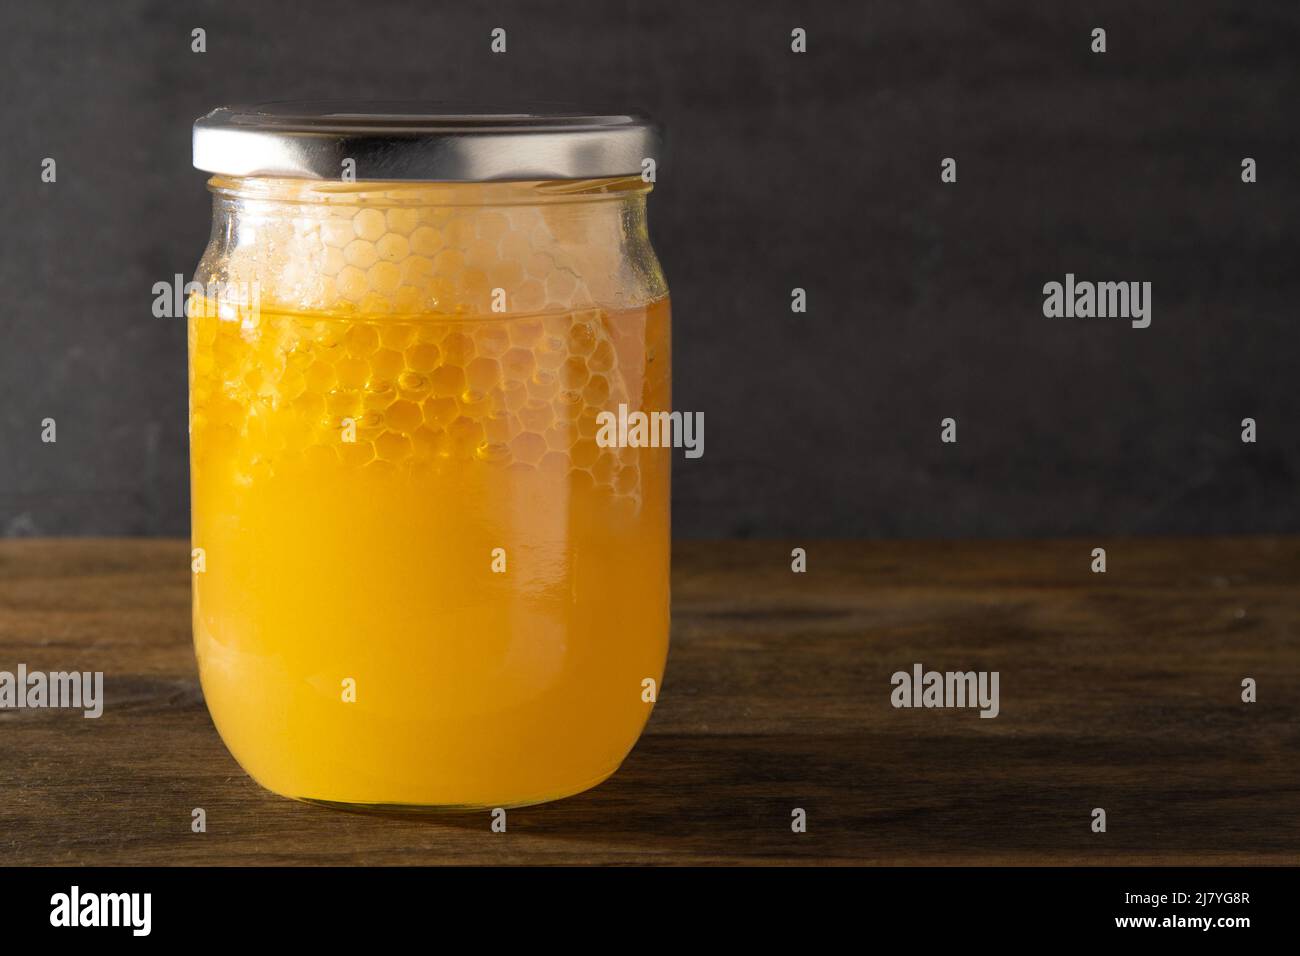 Jar of honey with honeycombs. Yellow transparent bee product. Half liter packaging with space for a label. Wooden background. Bee honey in a glass jar. Natural healthy food. Copy space. Stock Photo